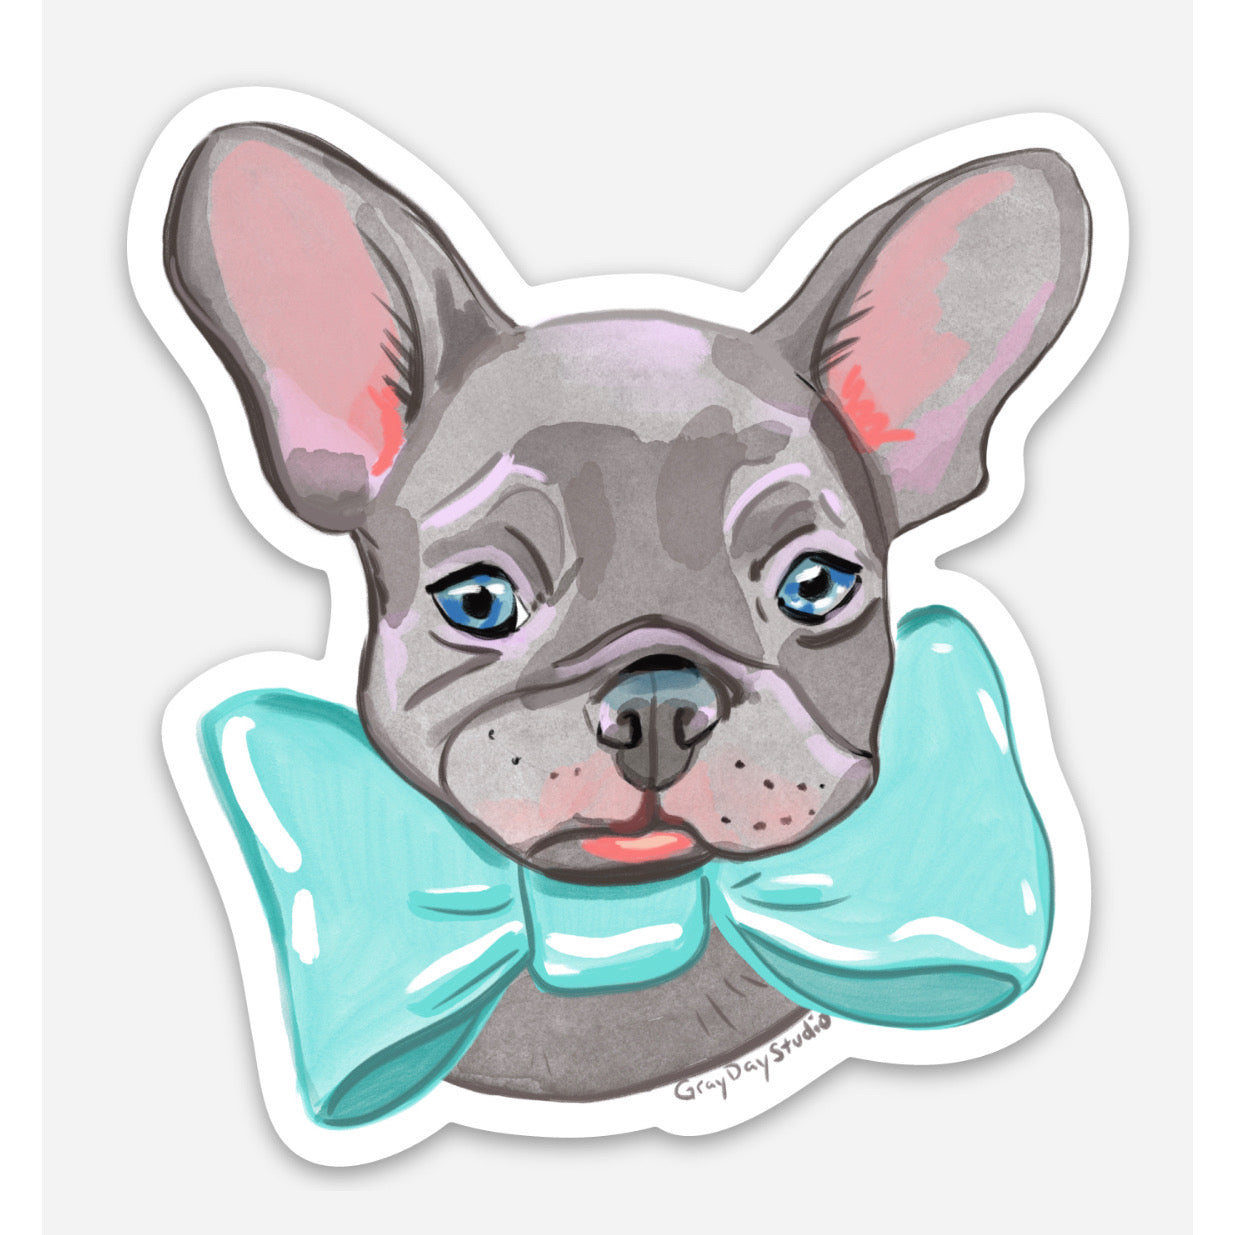 frenchie illustrated cute puppy sticker by Abigail Gray Swartz of Gray day studio